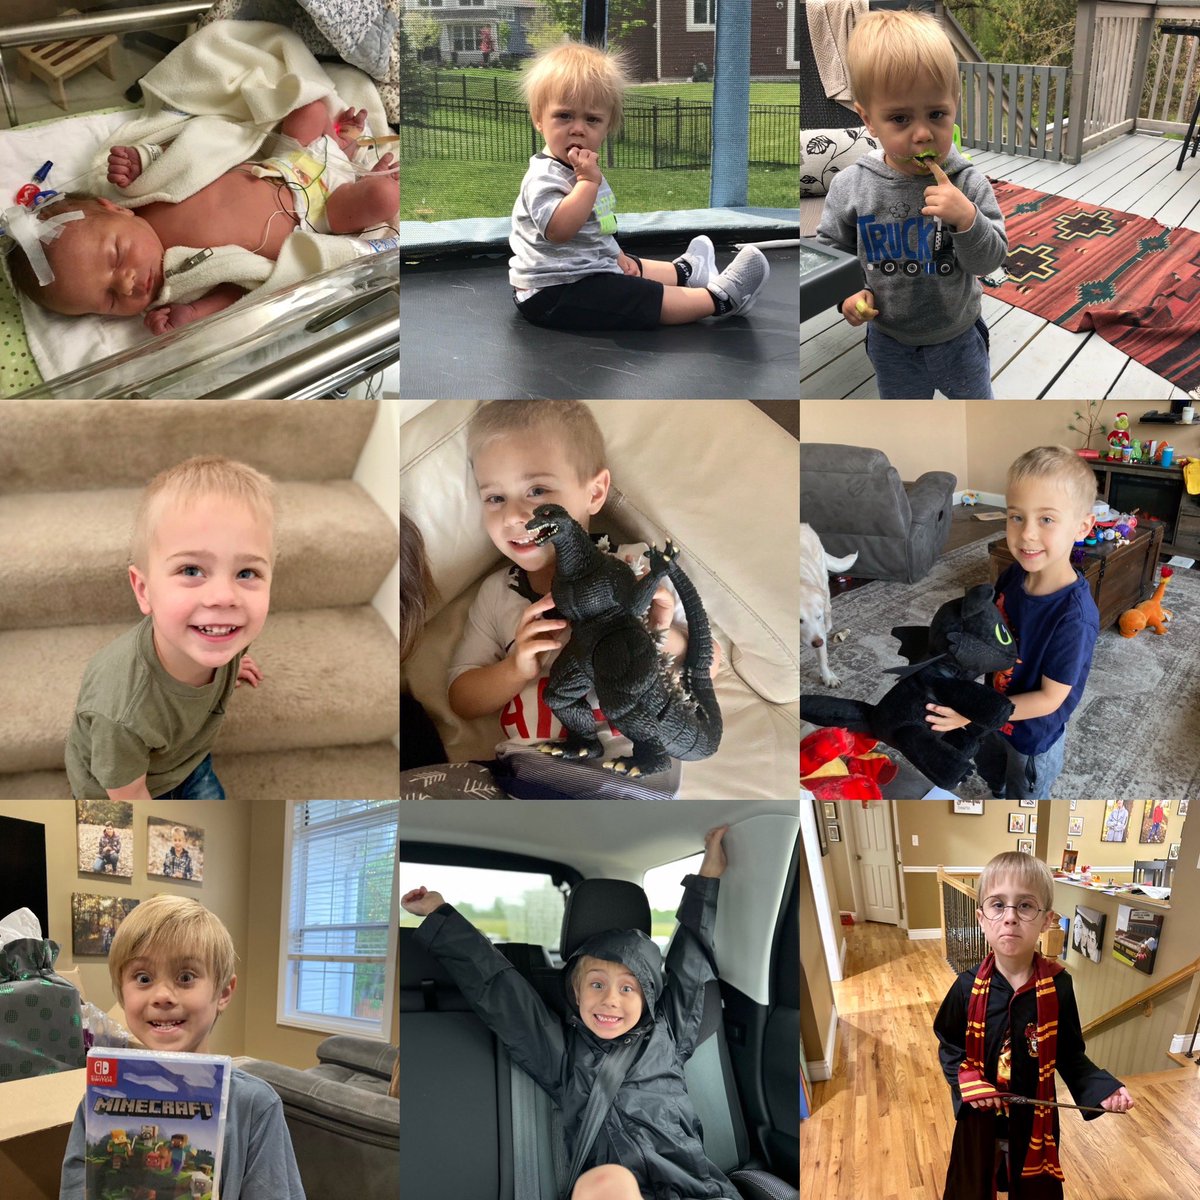 Happy 8th birthday to #MightyMax! Time flies by, and this kid is growing into quite an awesome little man! All the personality, imagination, kindness, competitiveness, intelligence, & charisma I could want in child #2! I love this kid to pieces!